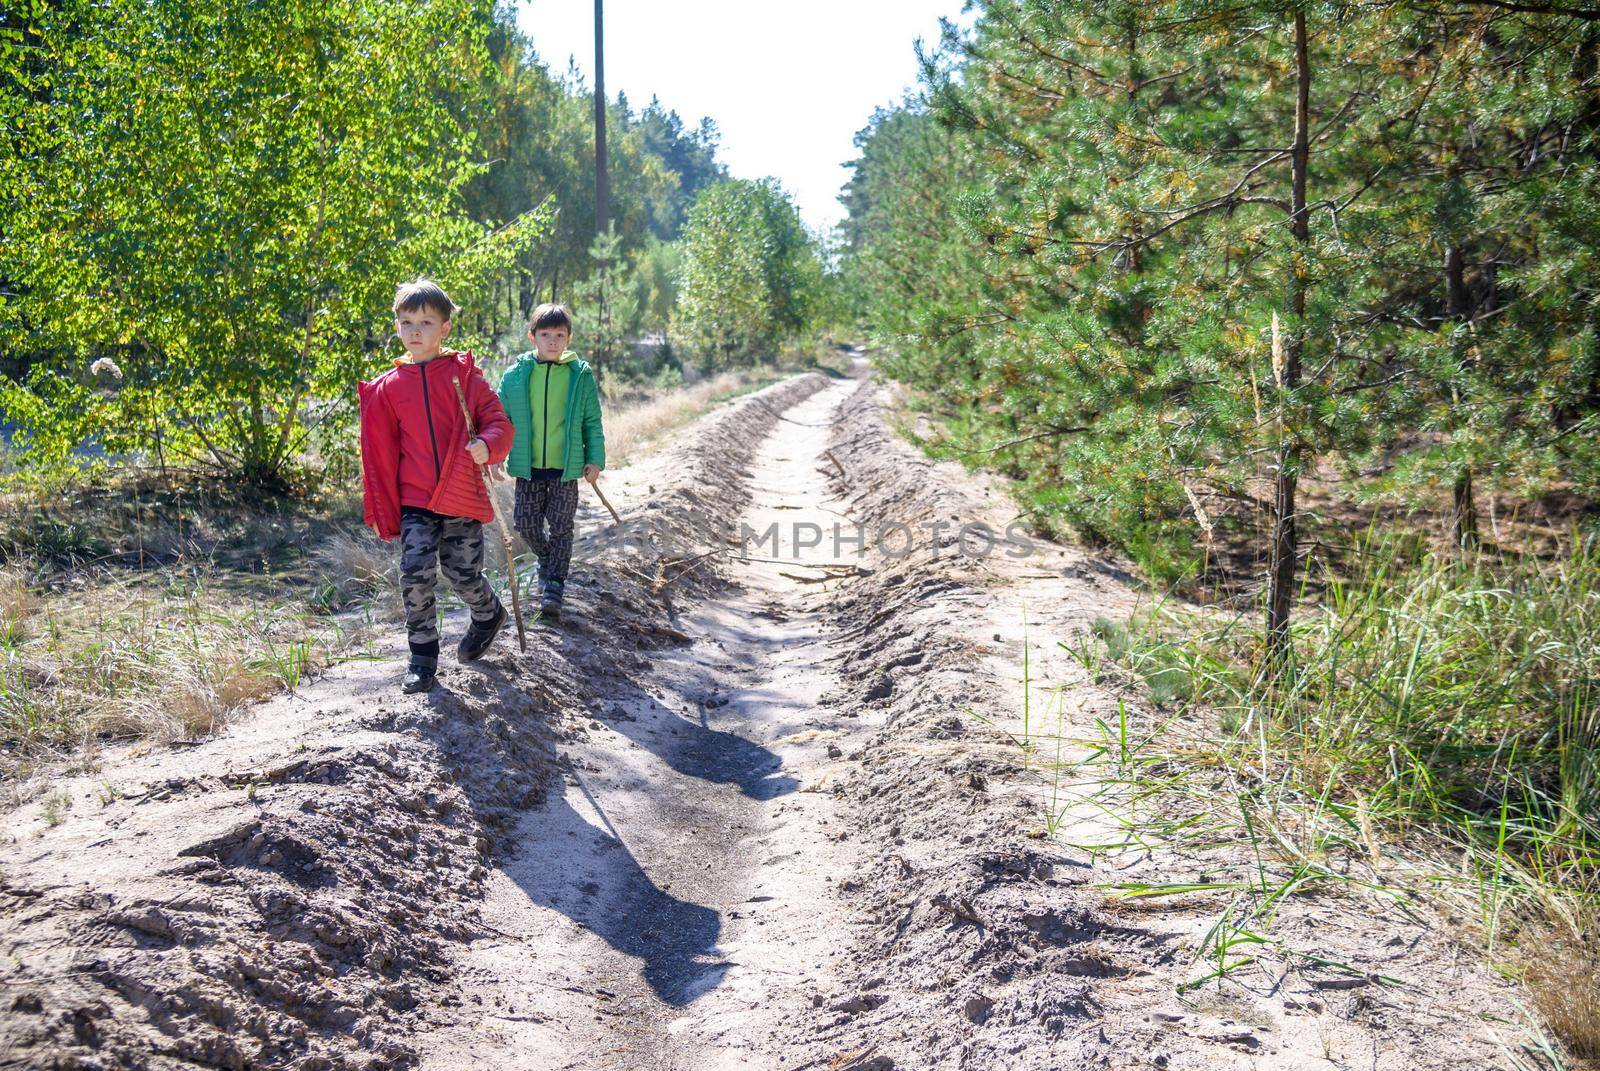 Two preschool children exploring forest, in autumn clothing, playing and learning in nature, alternative learning methods, homeschooling.